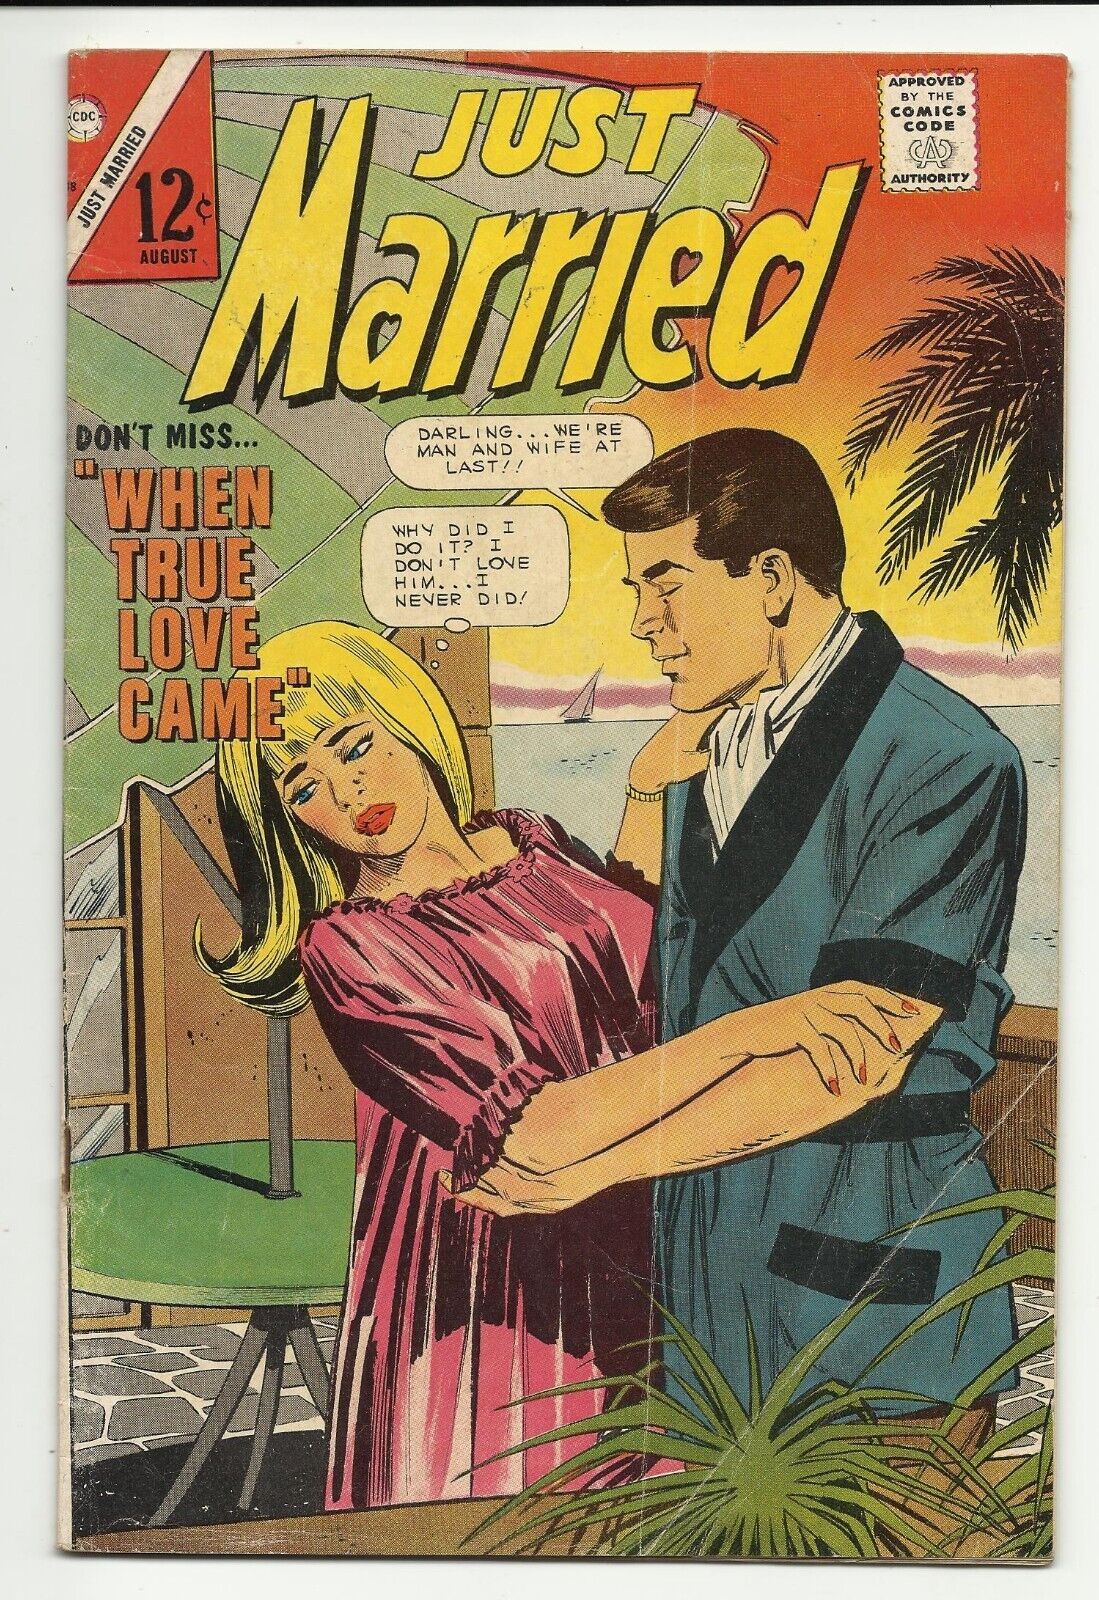 Just Married #48 - Charlton Comics Silver Age Romance - VG- 3.5